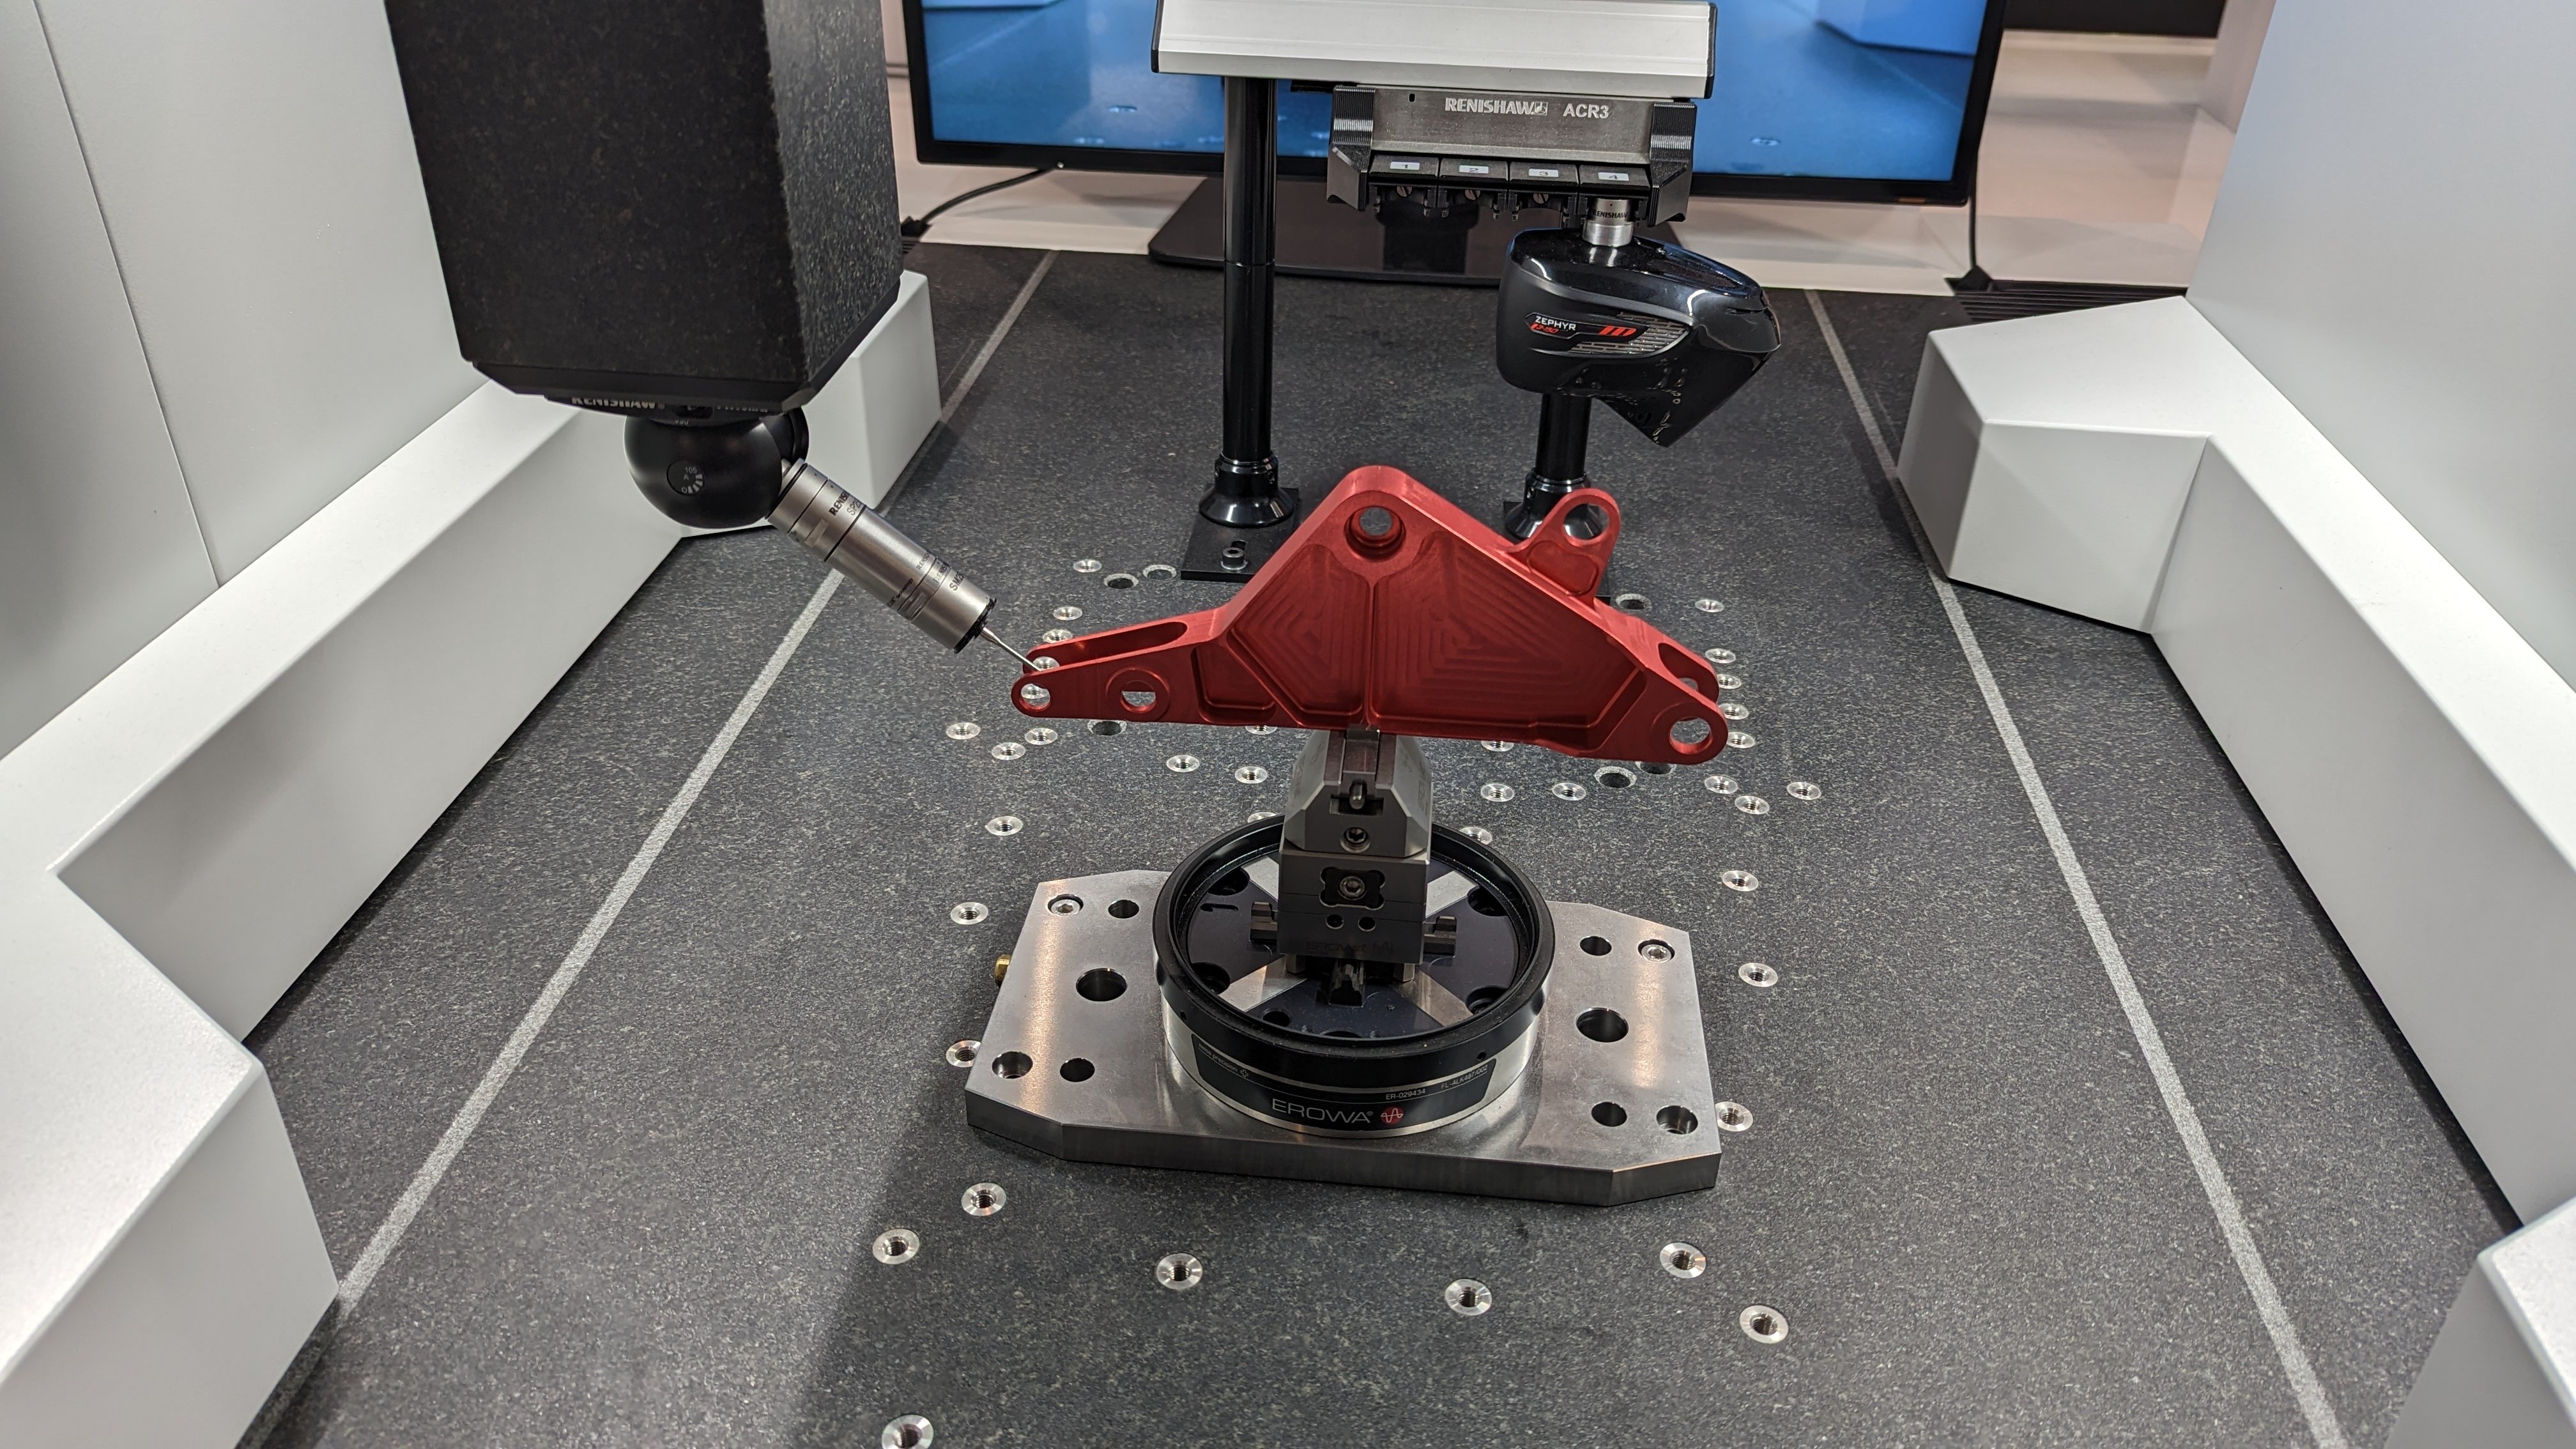 5-axis CMM measuring the part 